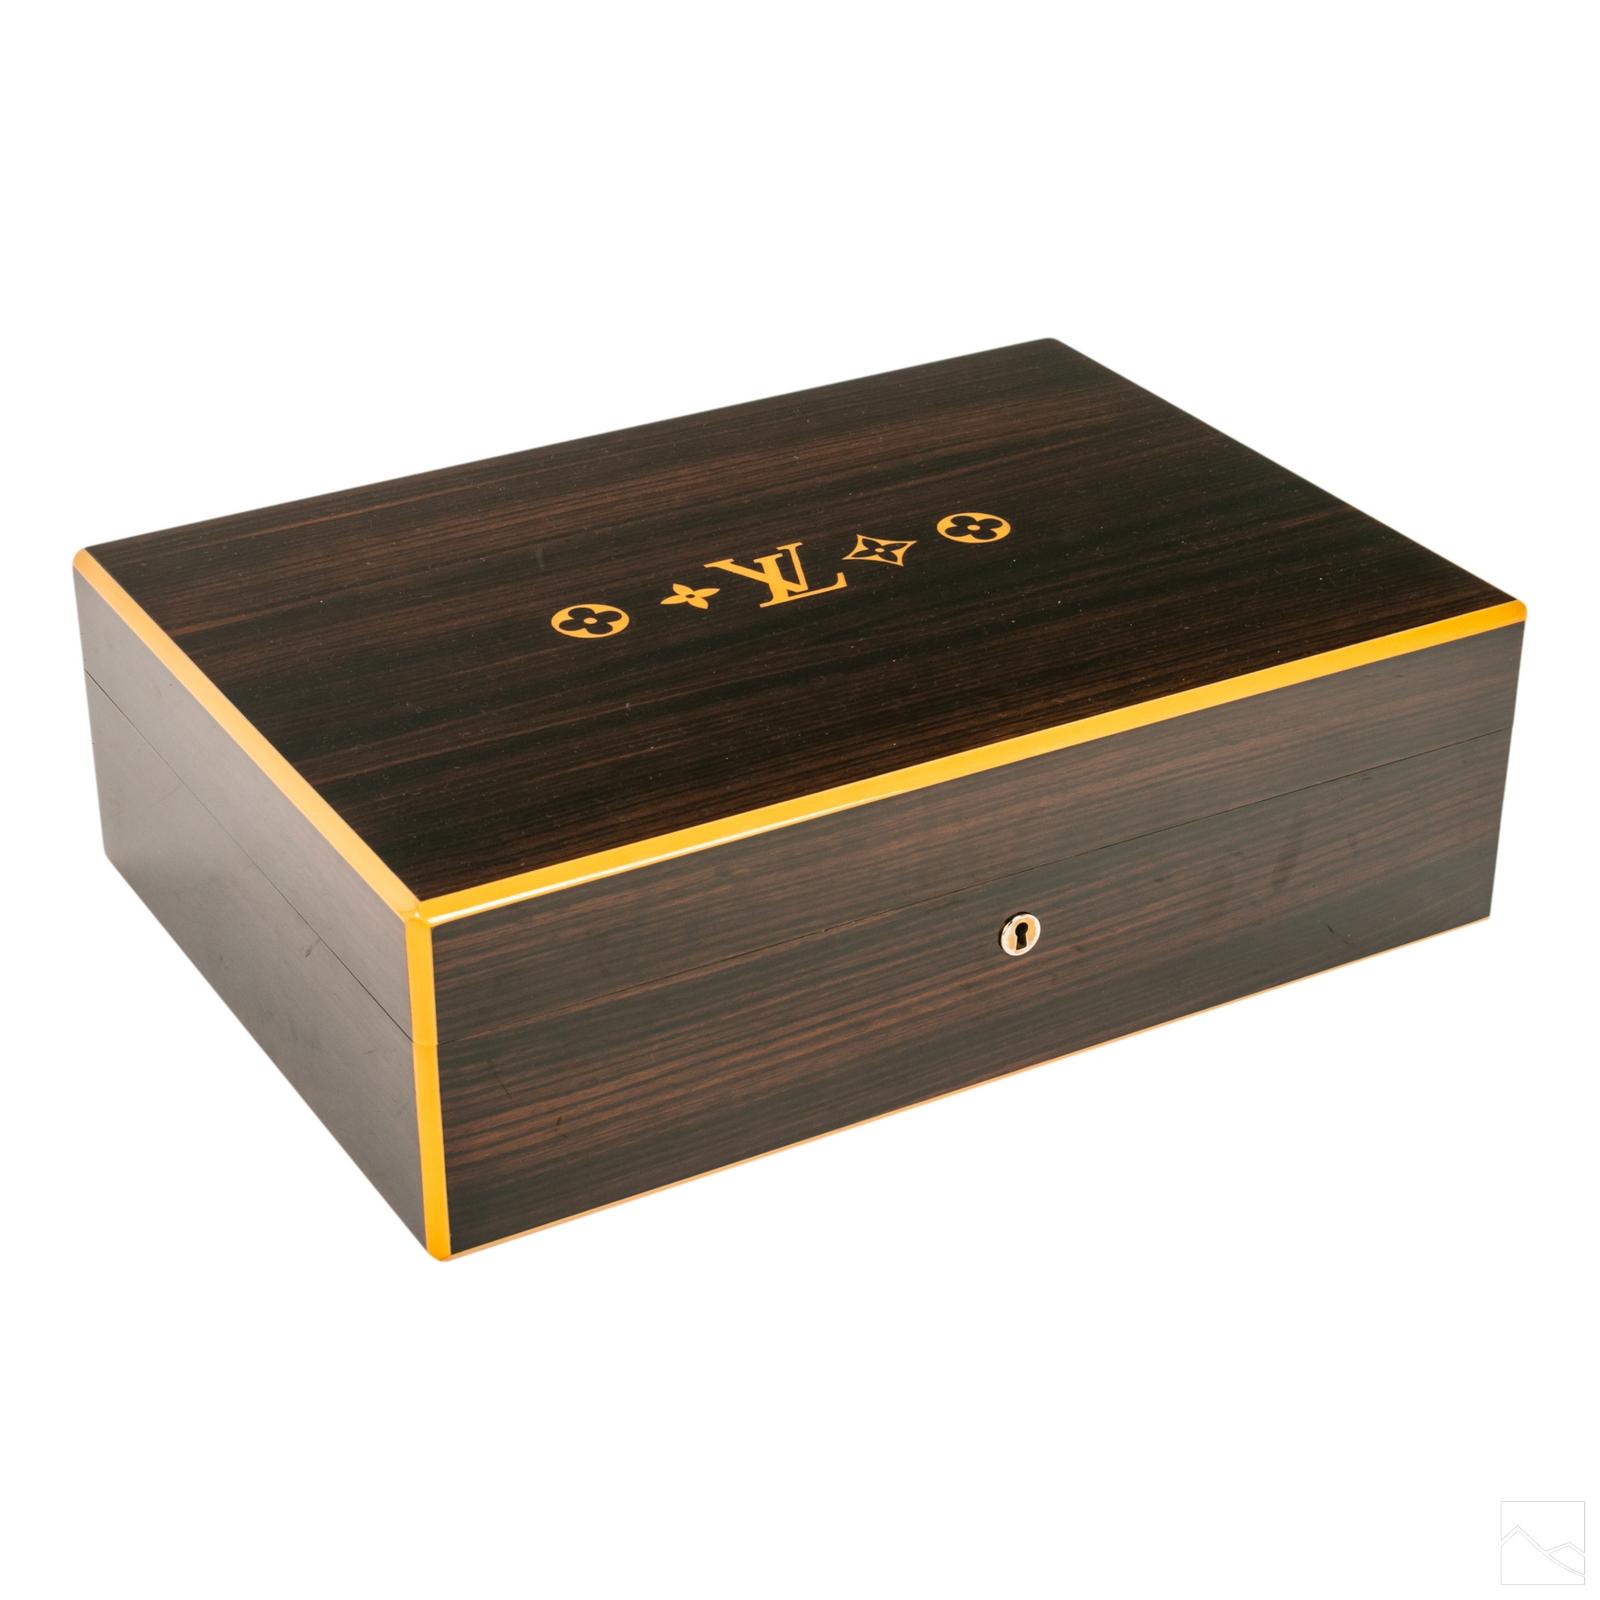 Sold at Auction: Louis Vuitton, Monogram, a cigar humidor in the